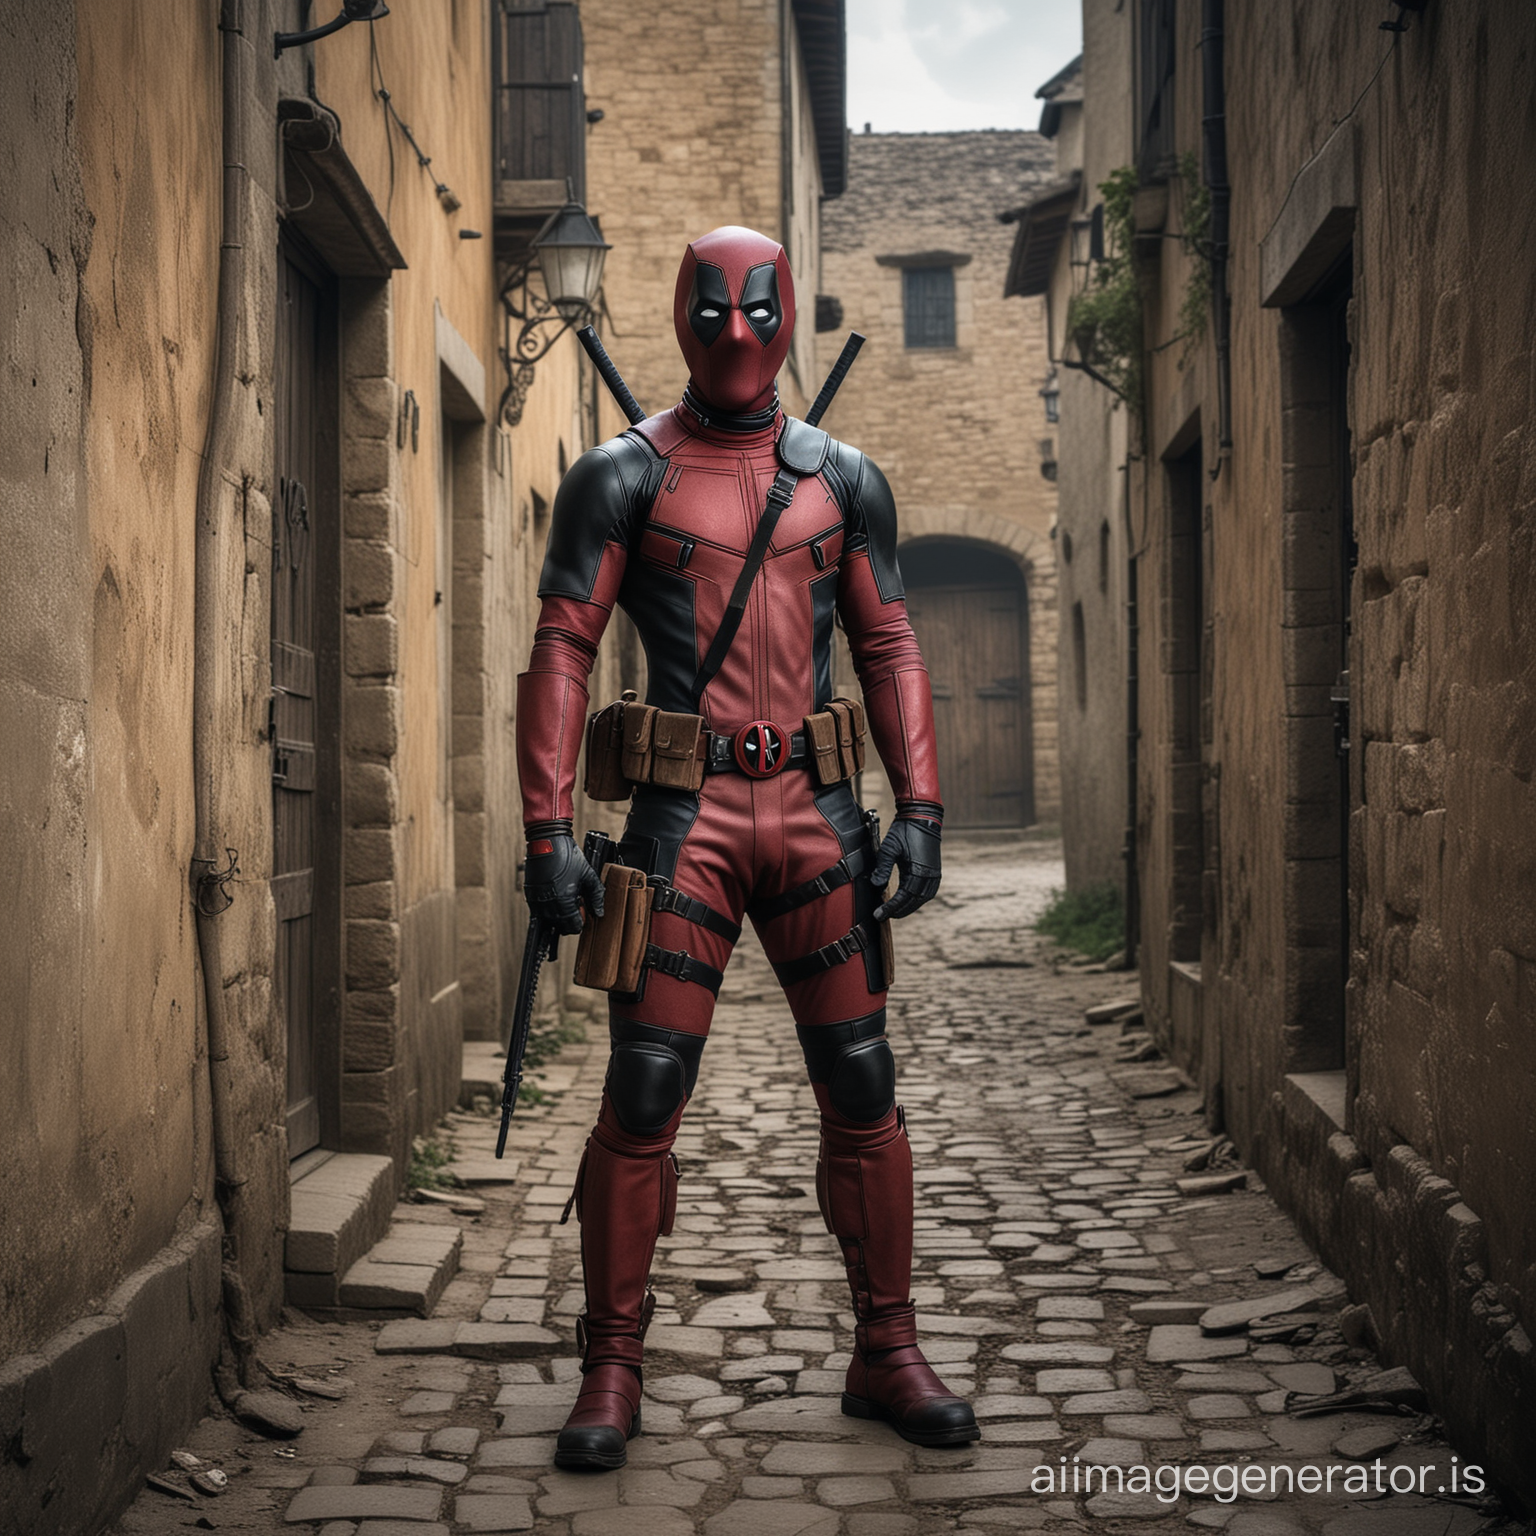 Deadpool, in 1850, standing in a dark alley in a medieval village, photo in color